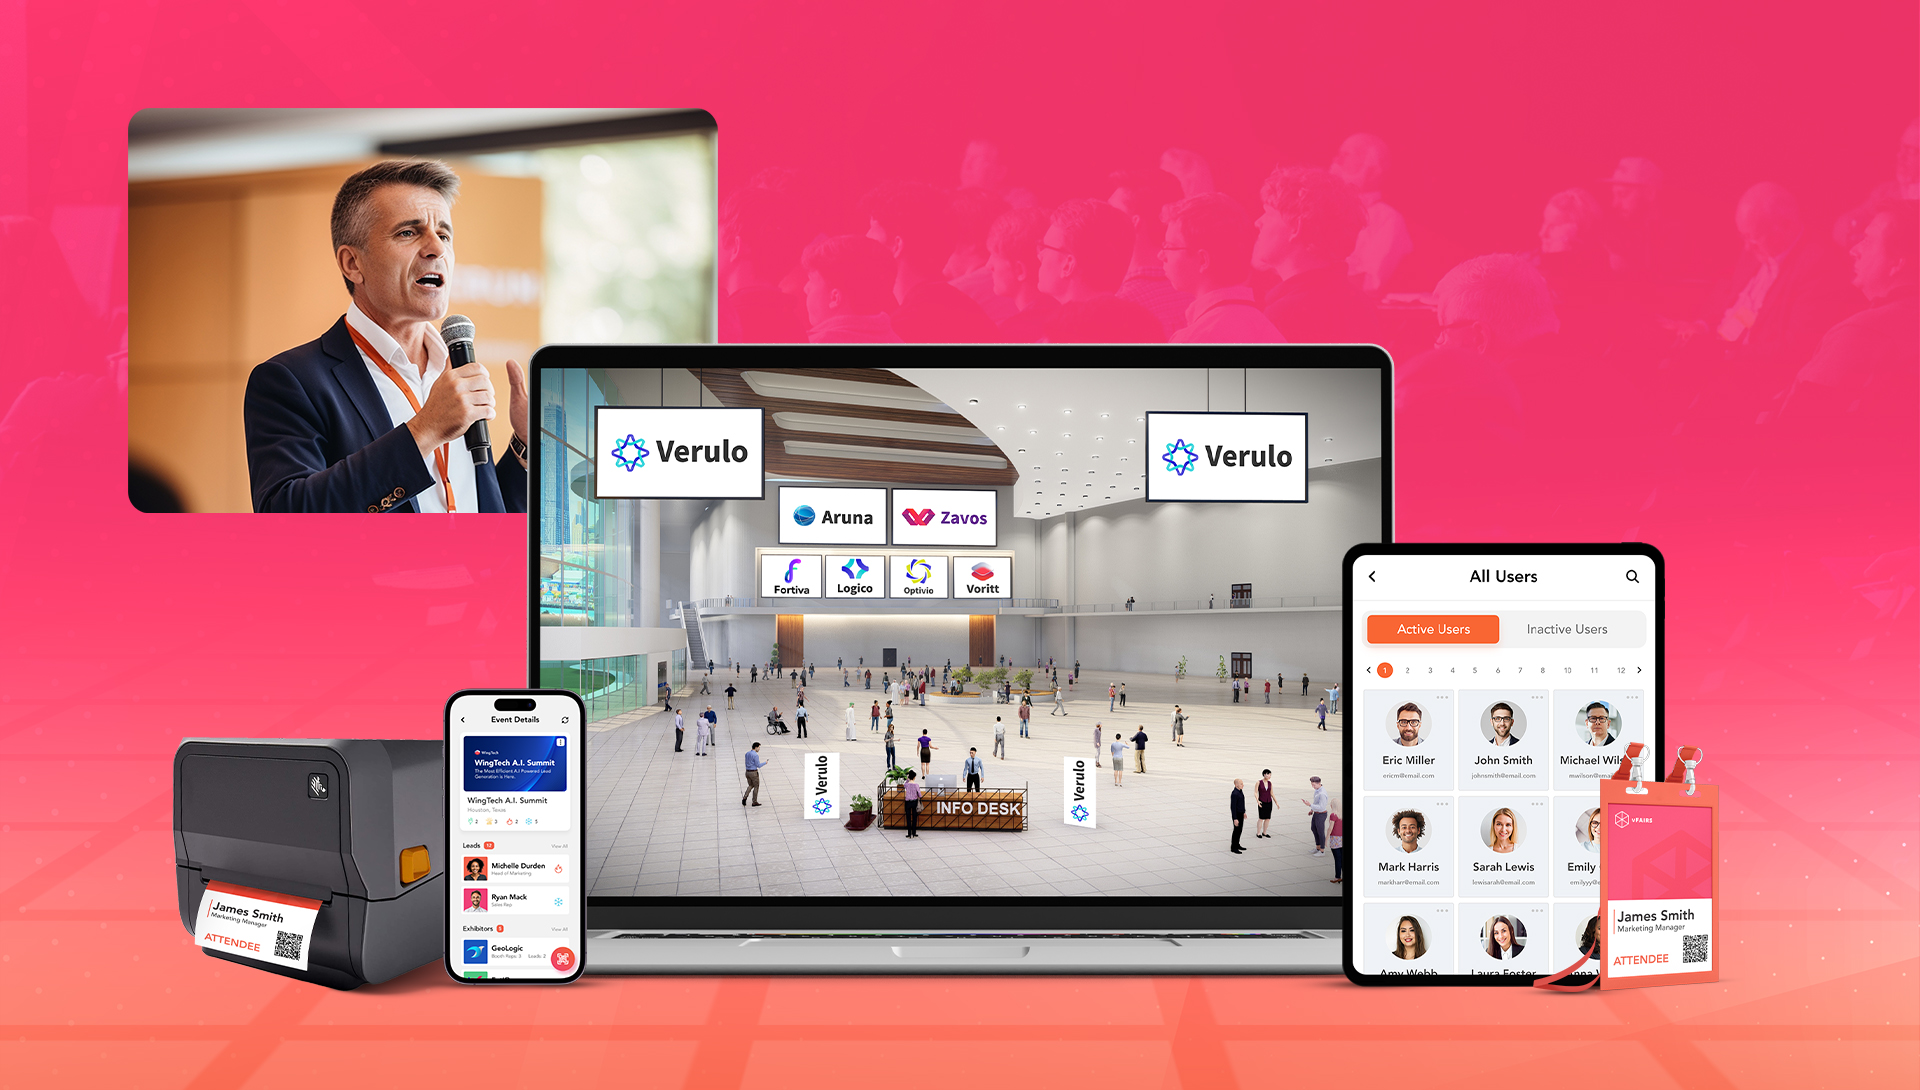 #1 rated Event Management Platform that goes the extra mile to help you host stellar in-person, hybrid, and online events. 